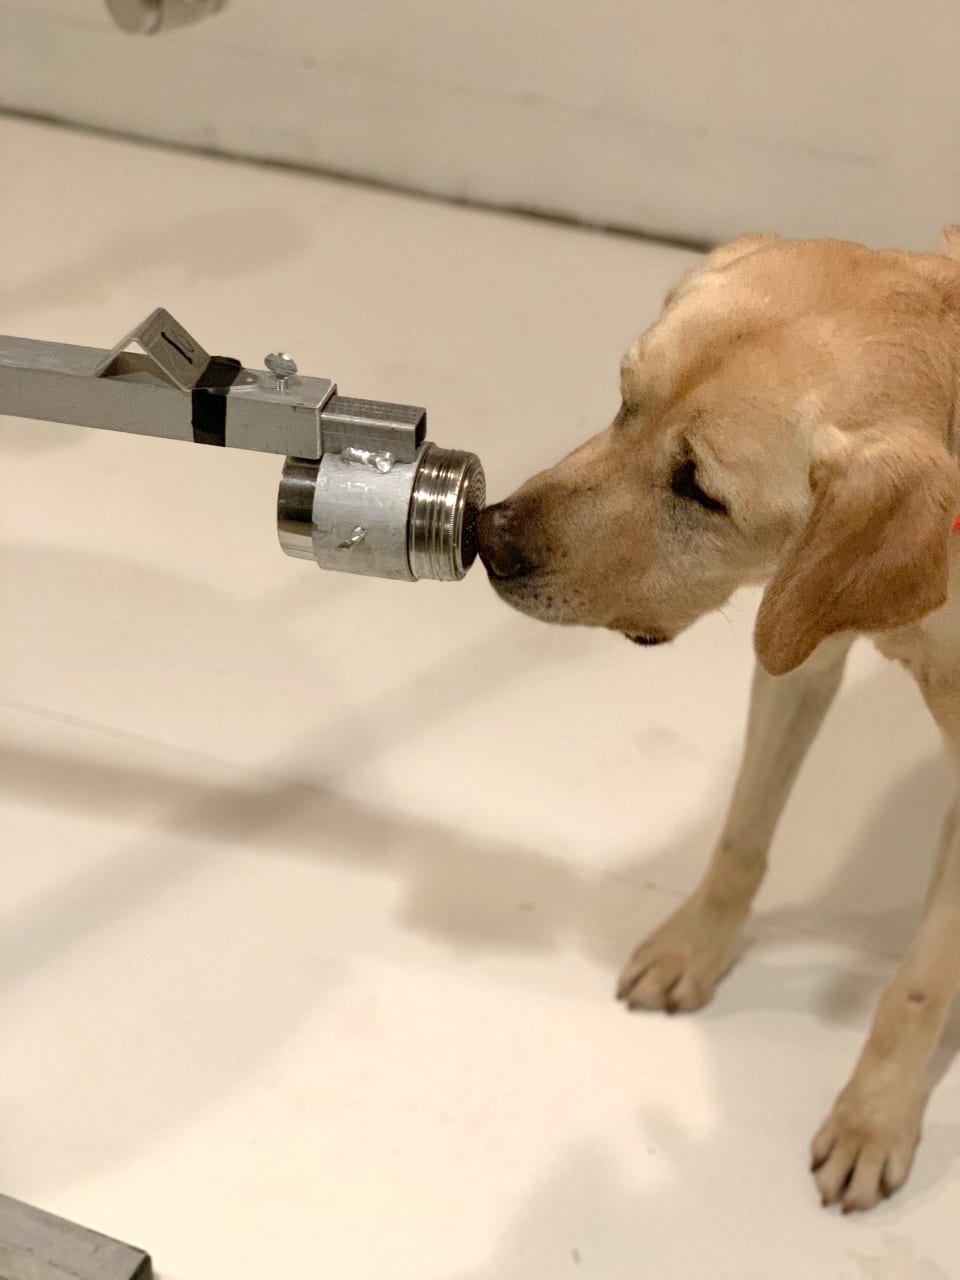 Dogs can sniff out coronavirus with impressive accuracy